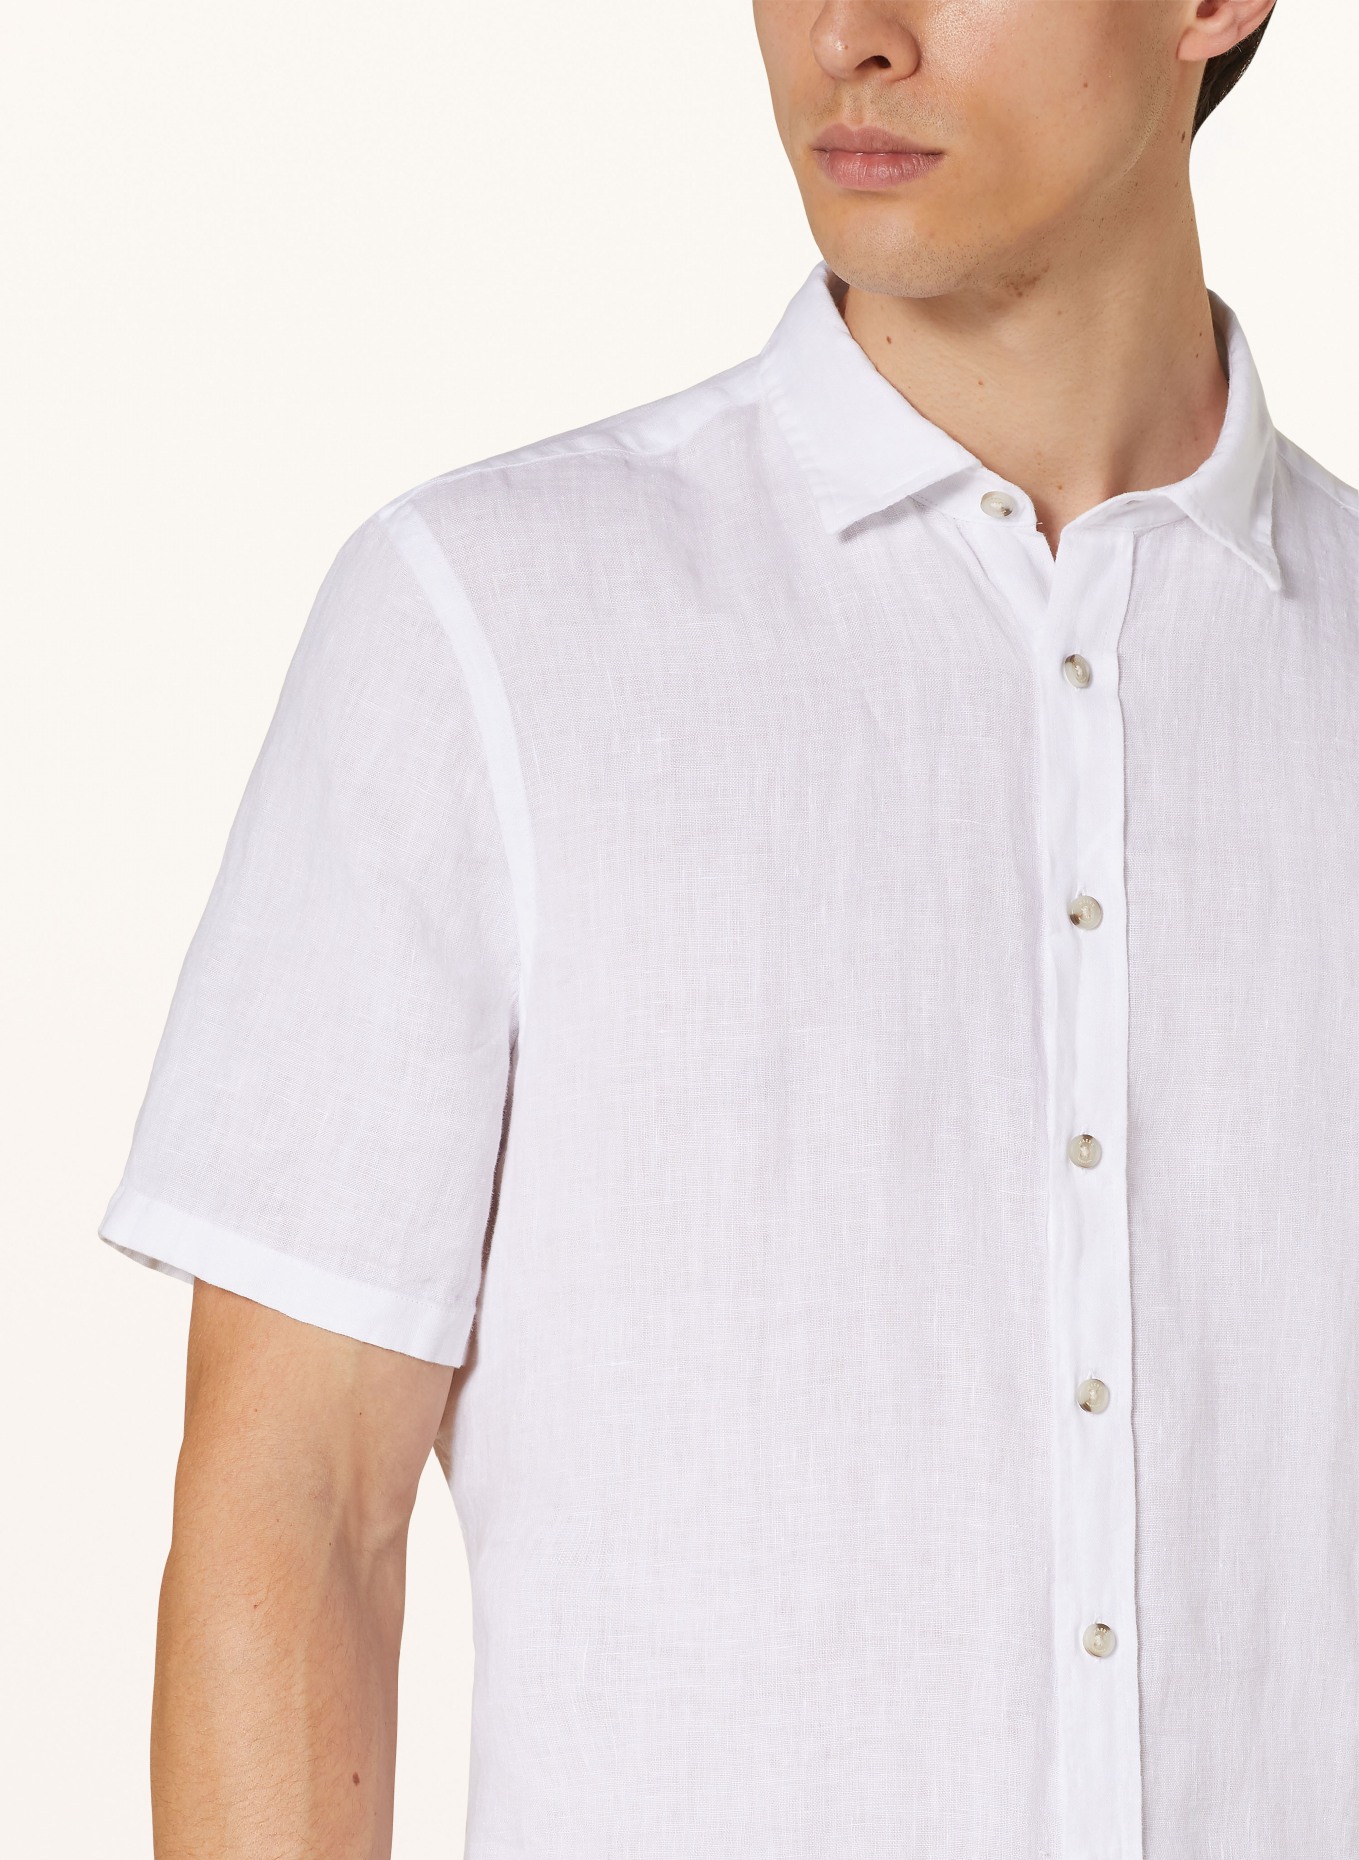 MAERZ MUENCHEN Short sleeve shirt modern fit in linen, Color: WHITE (Image 4)